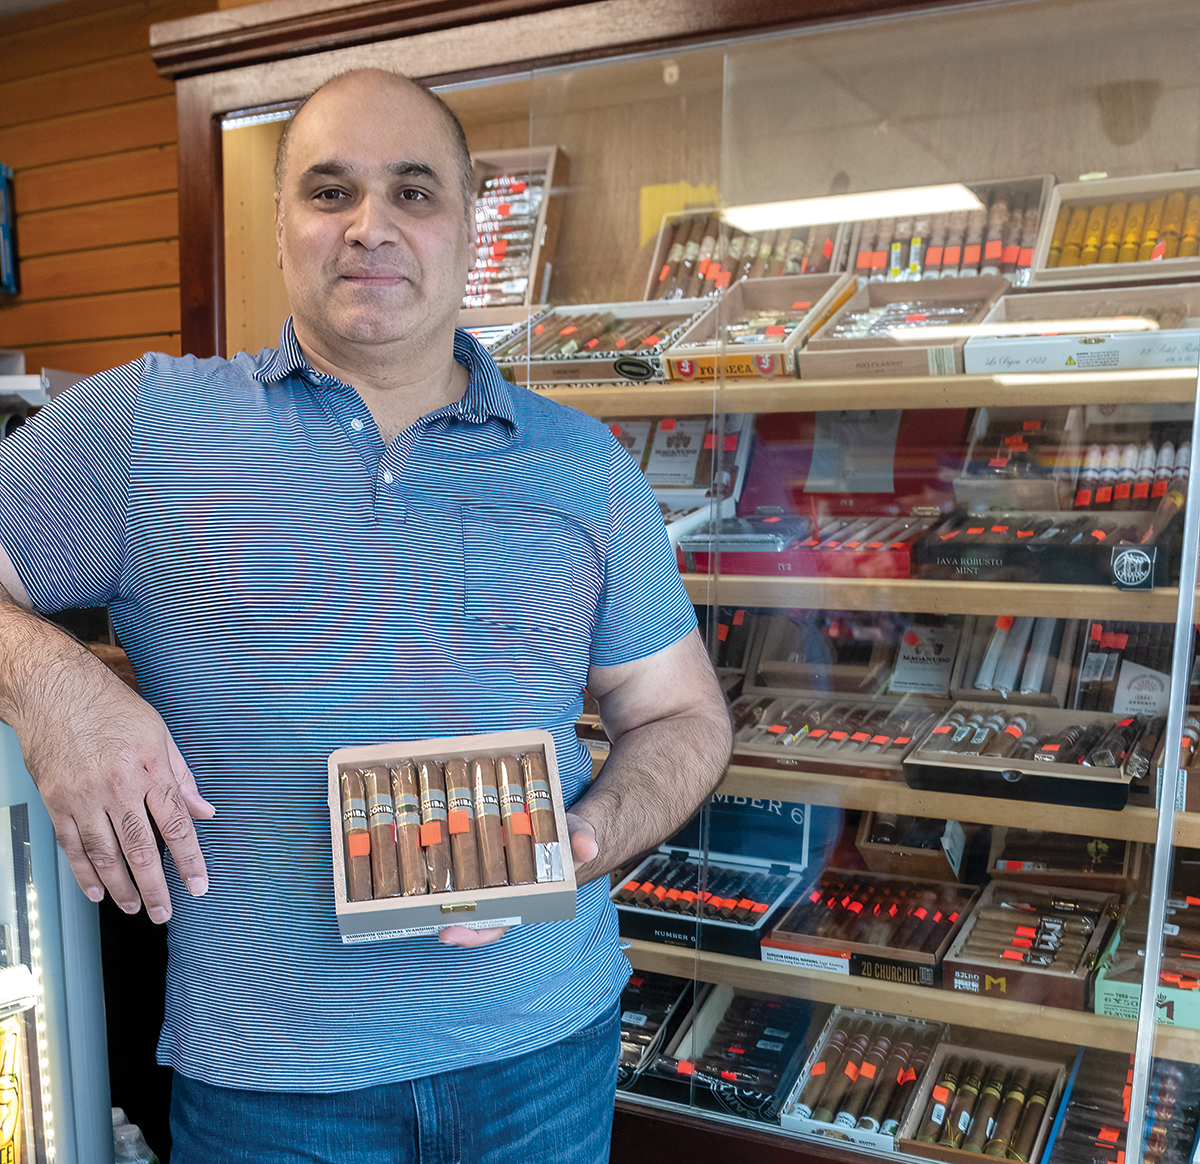 ON A ROLL: Muhammad Choudhry has built BK House of Cigars Inc. into a business that he says has helped him live the American dream after years of struggle.  PBN PHOTO/MICHAEL SALERNO